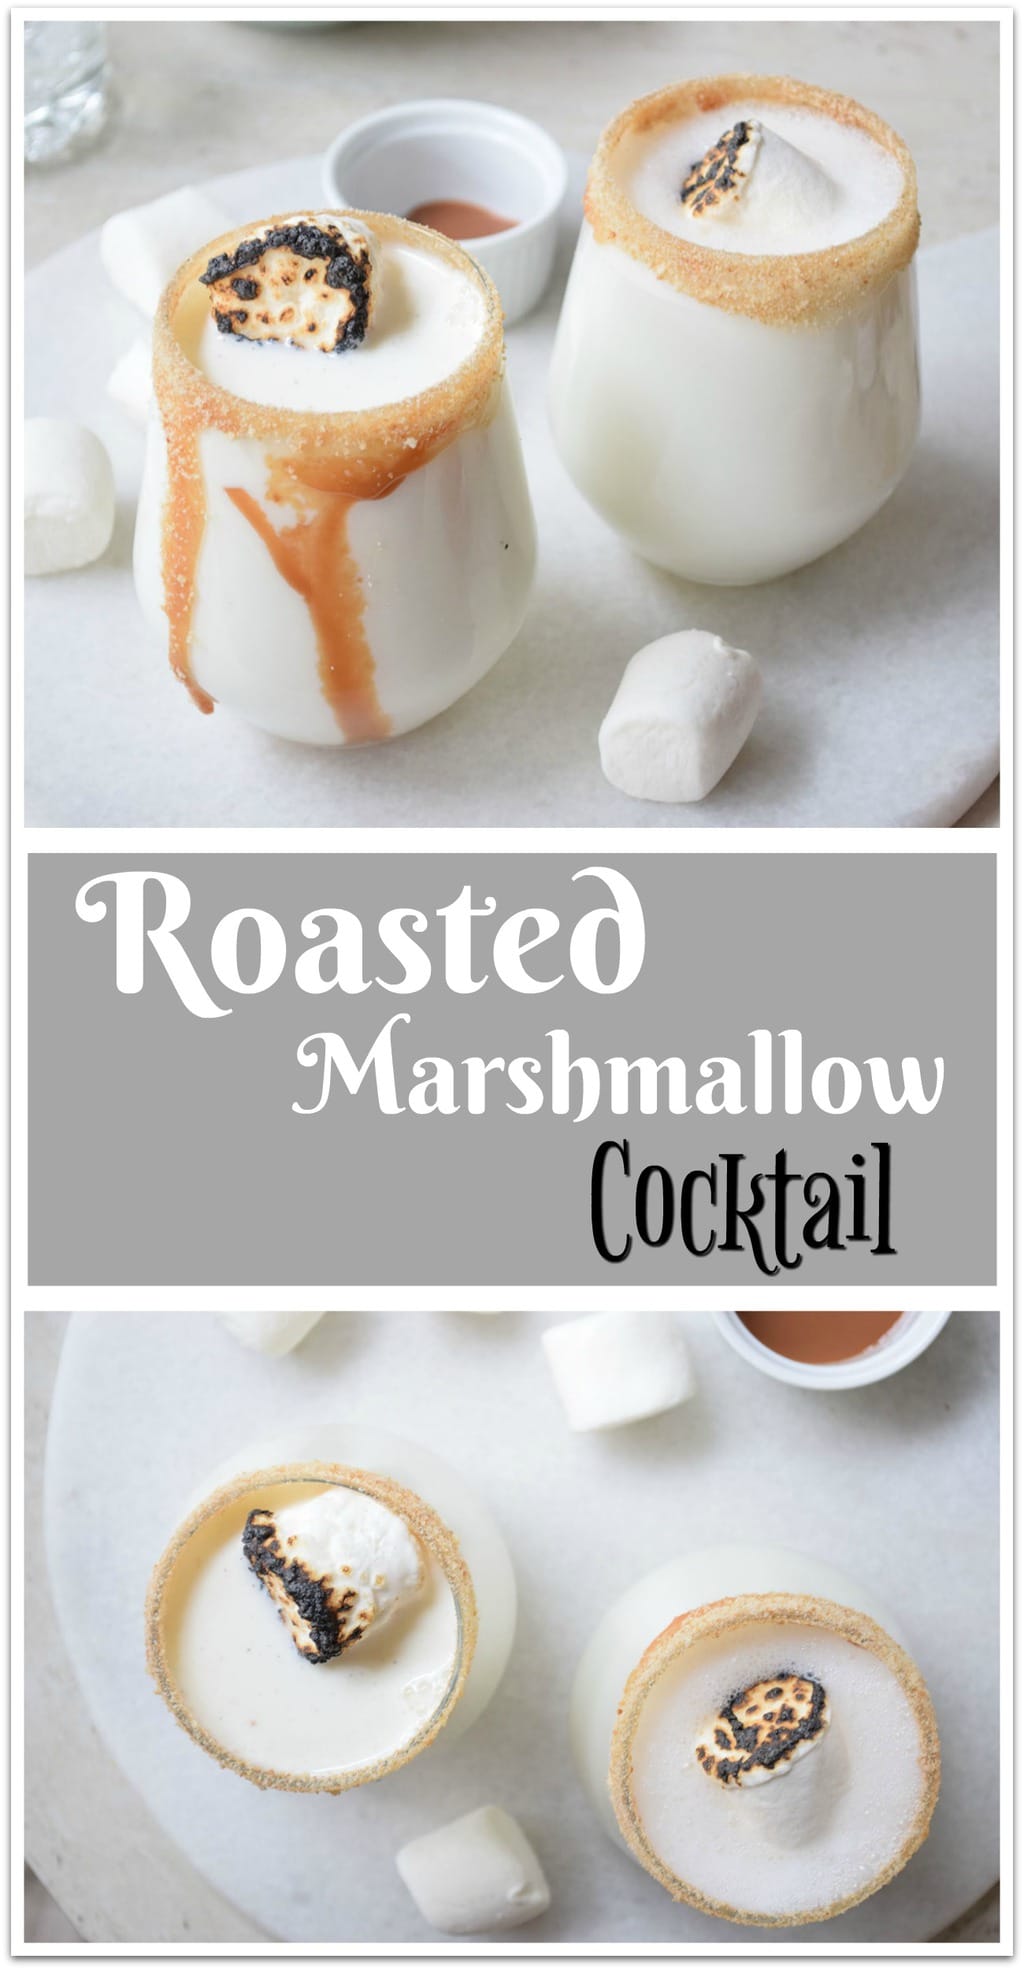 This roasted marshmallow cocktail recipe is one of my favorites ever, and it's so easy! Doesn't it look heavenly?